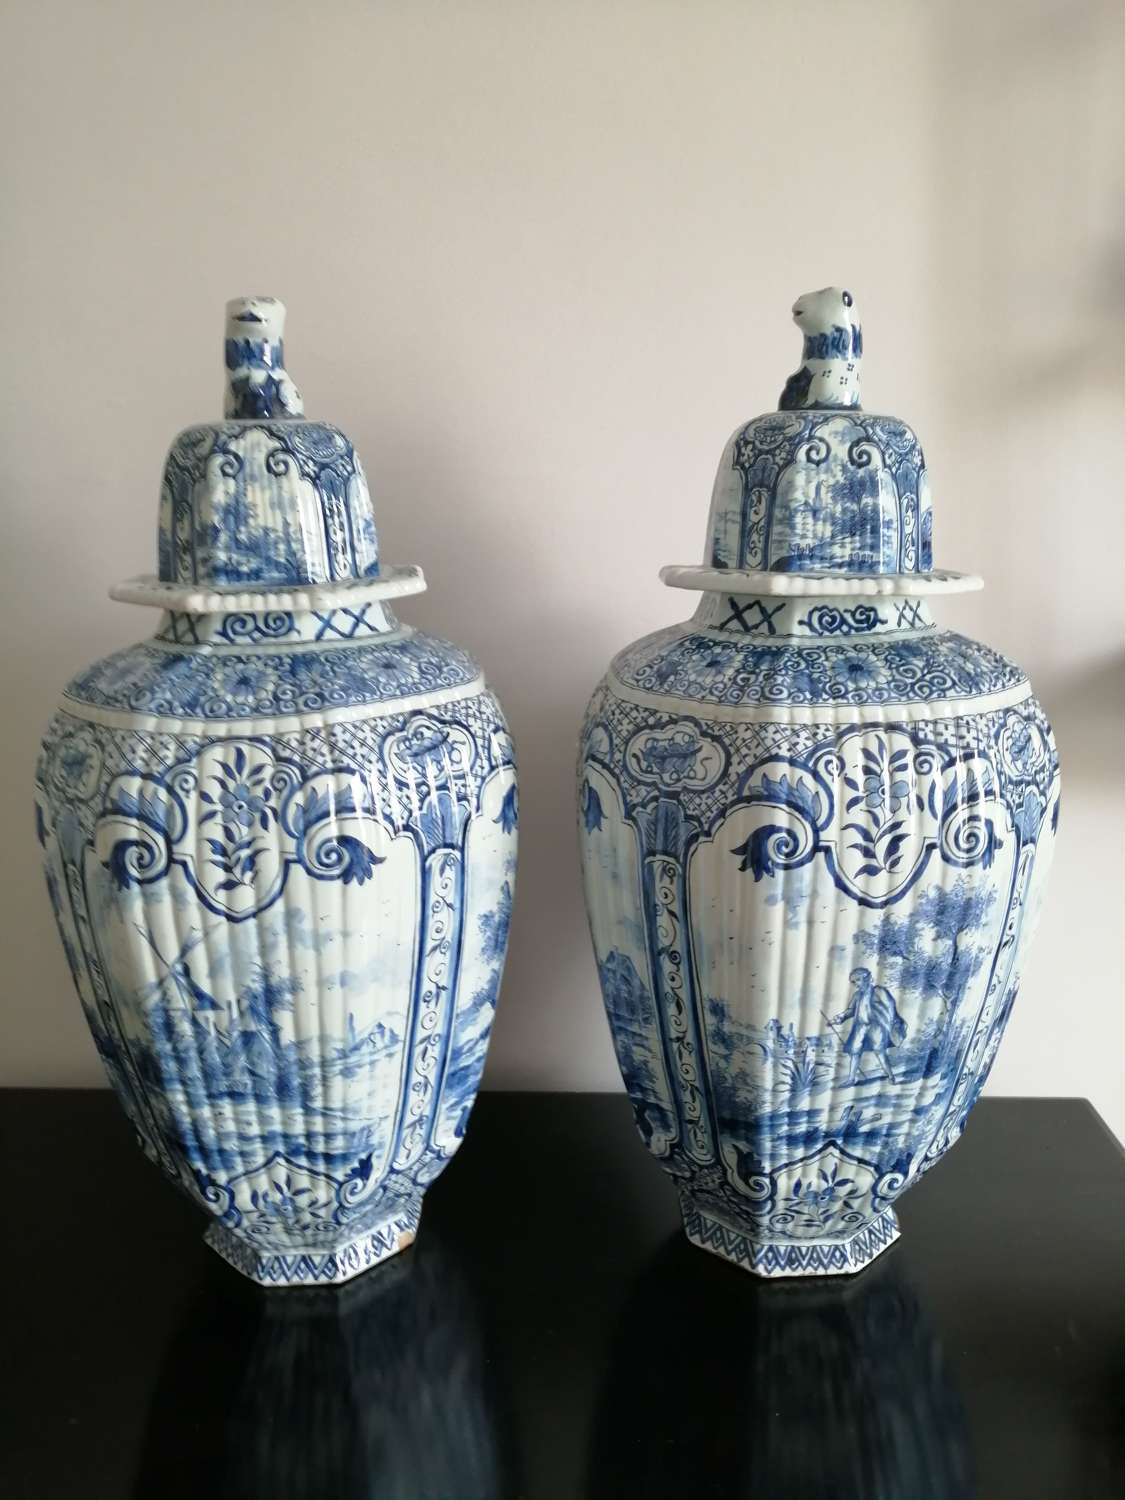 A large and impressive pair of Dutch Delft Blue & White vases & covers